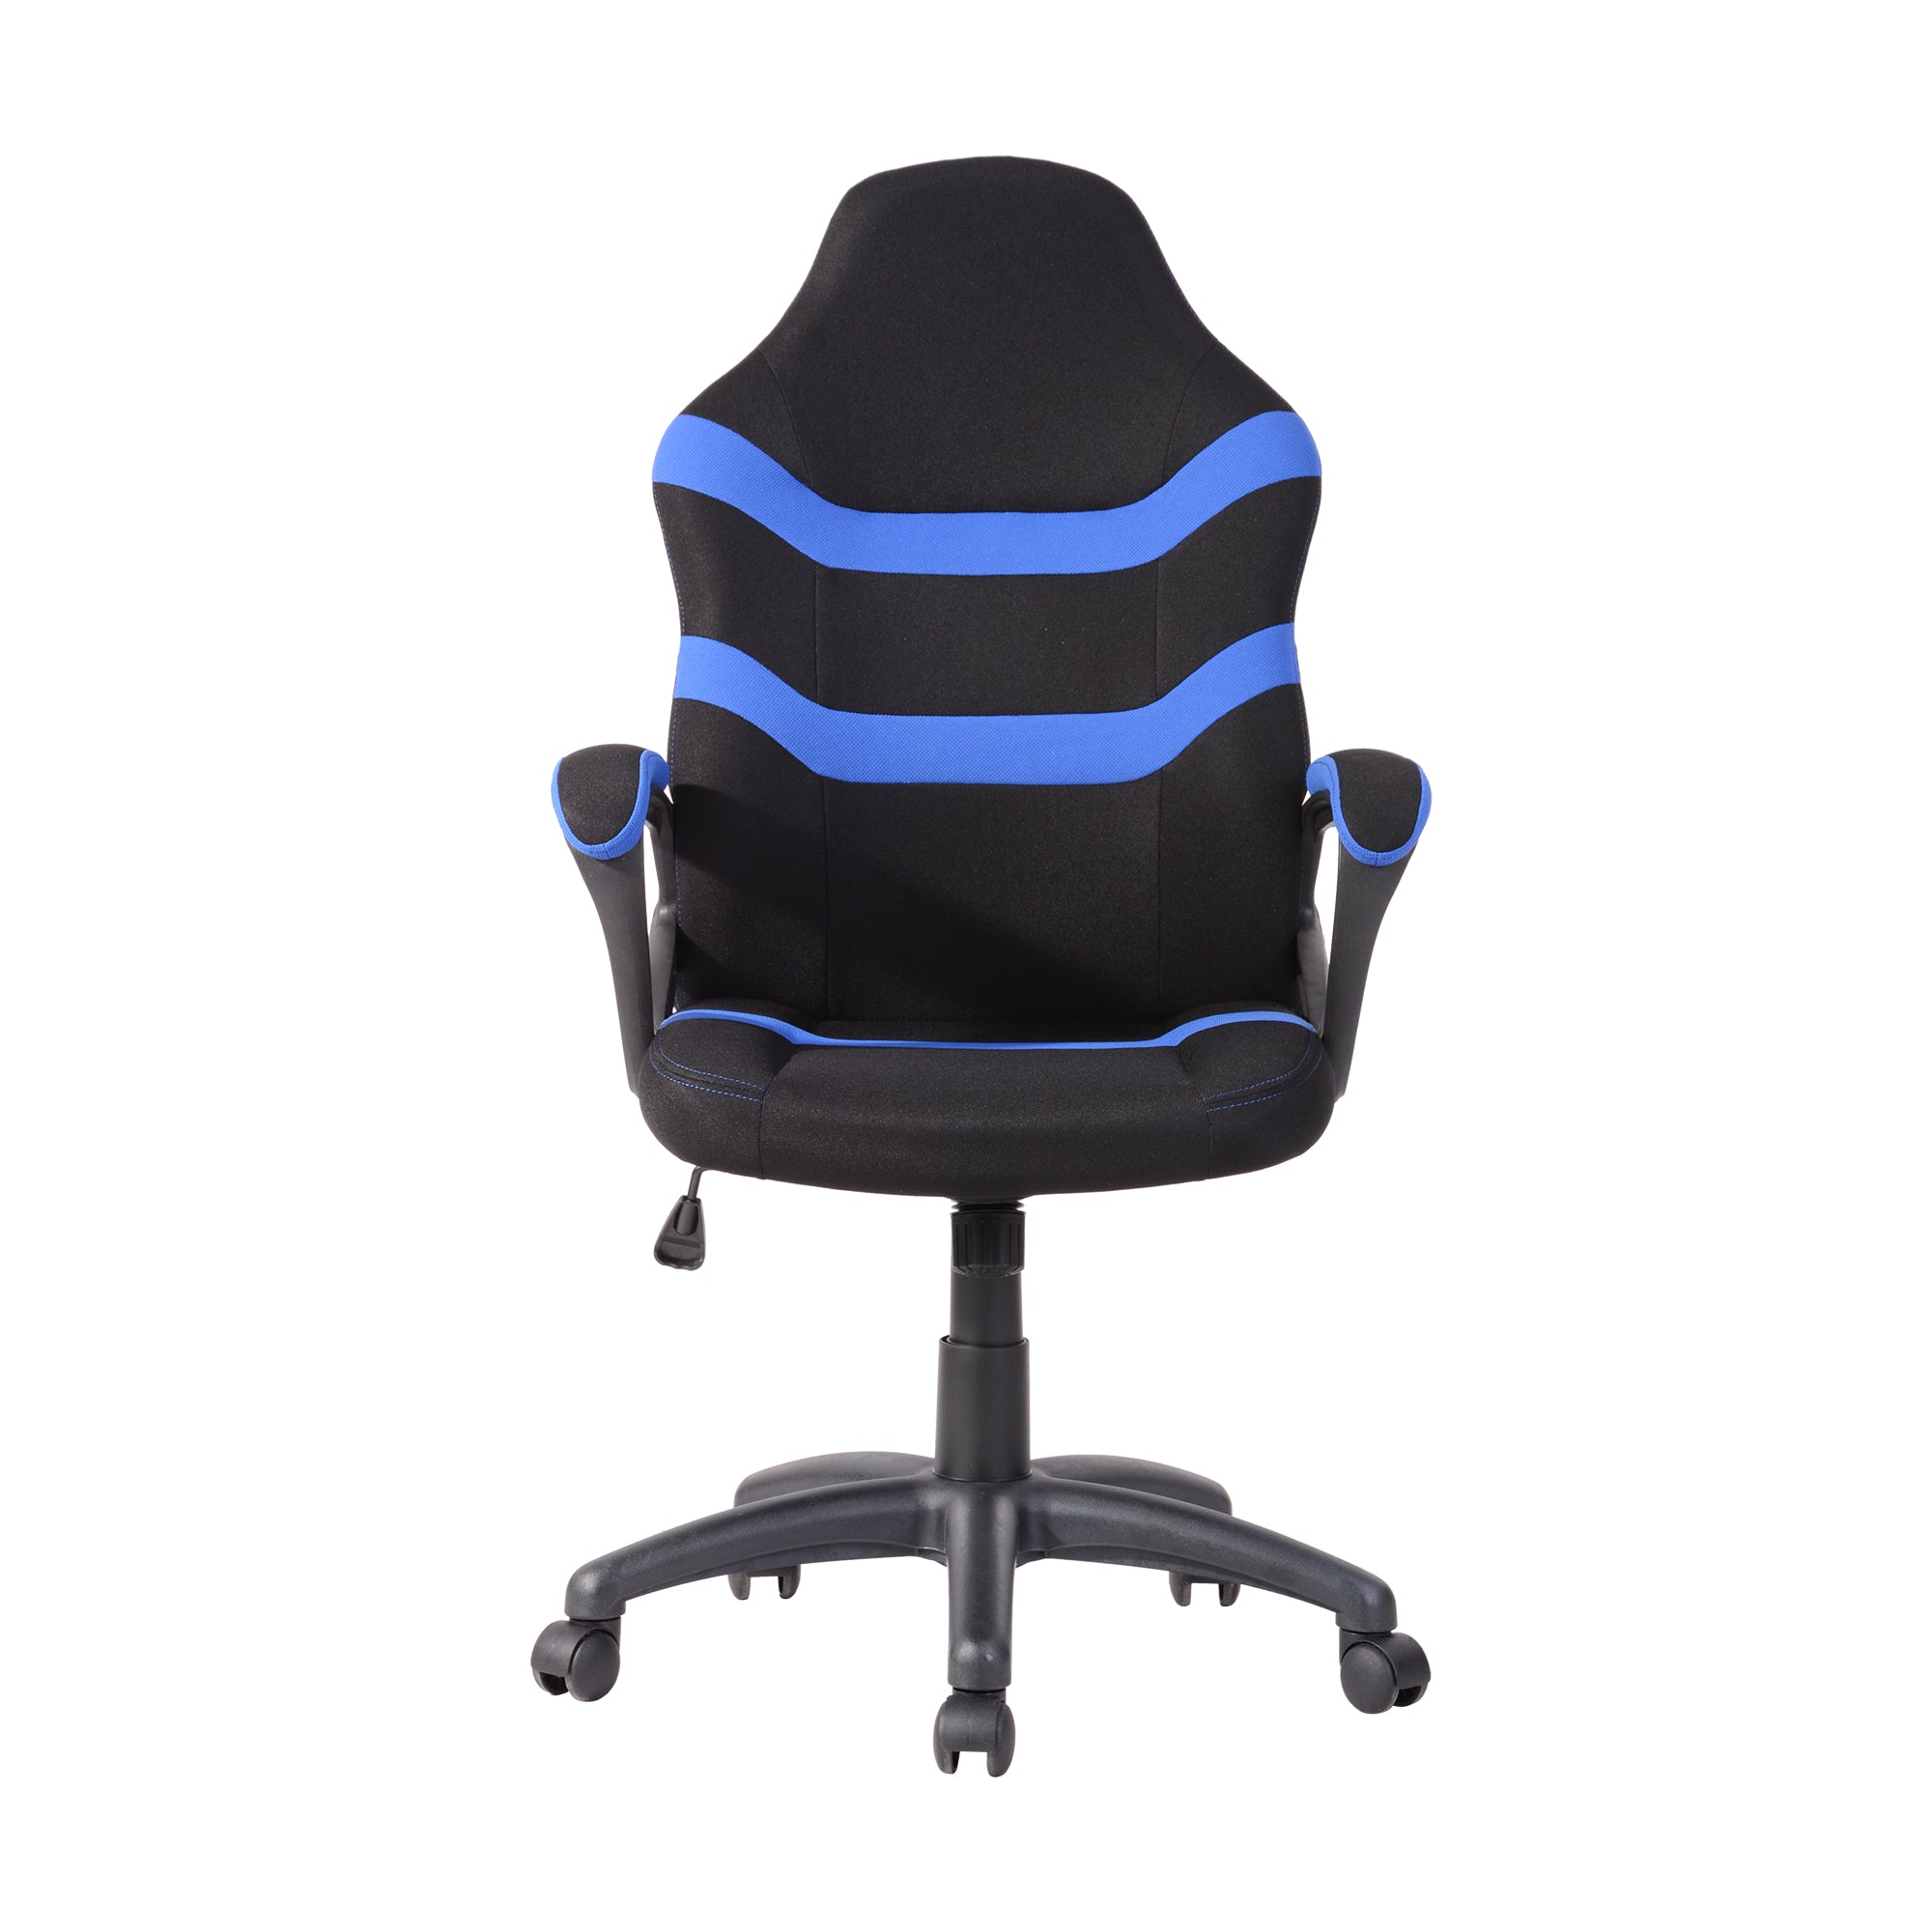 Ergonomic Height-Adjustable Office Gaming Chair with Breathable Fabric for Office, Study-room-Boyel Living